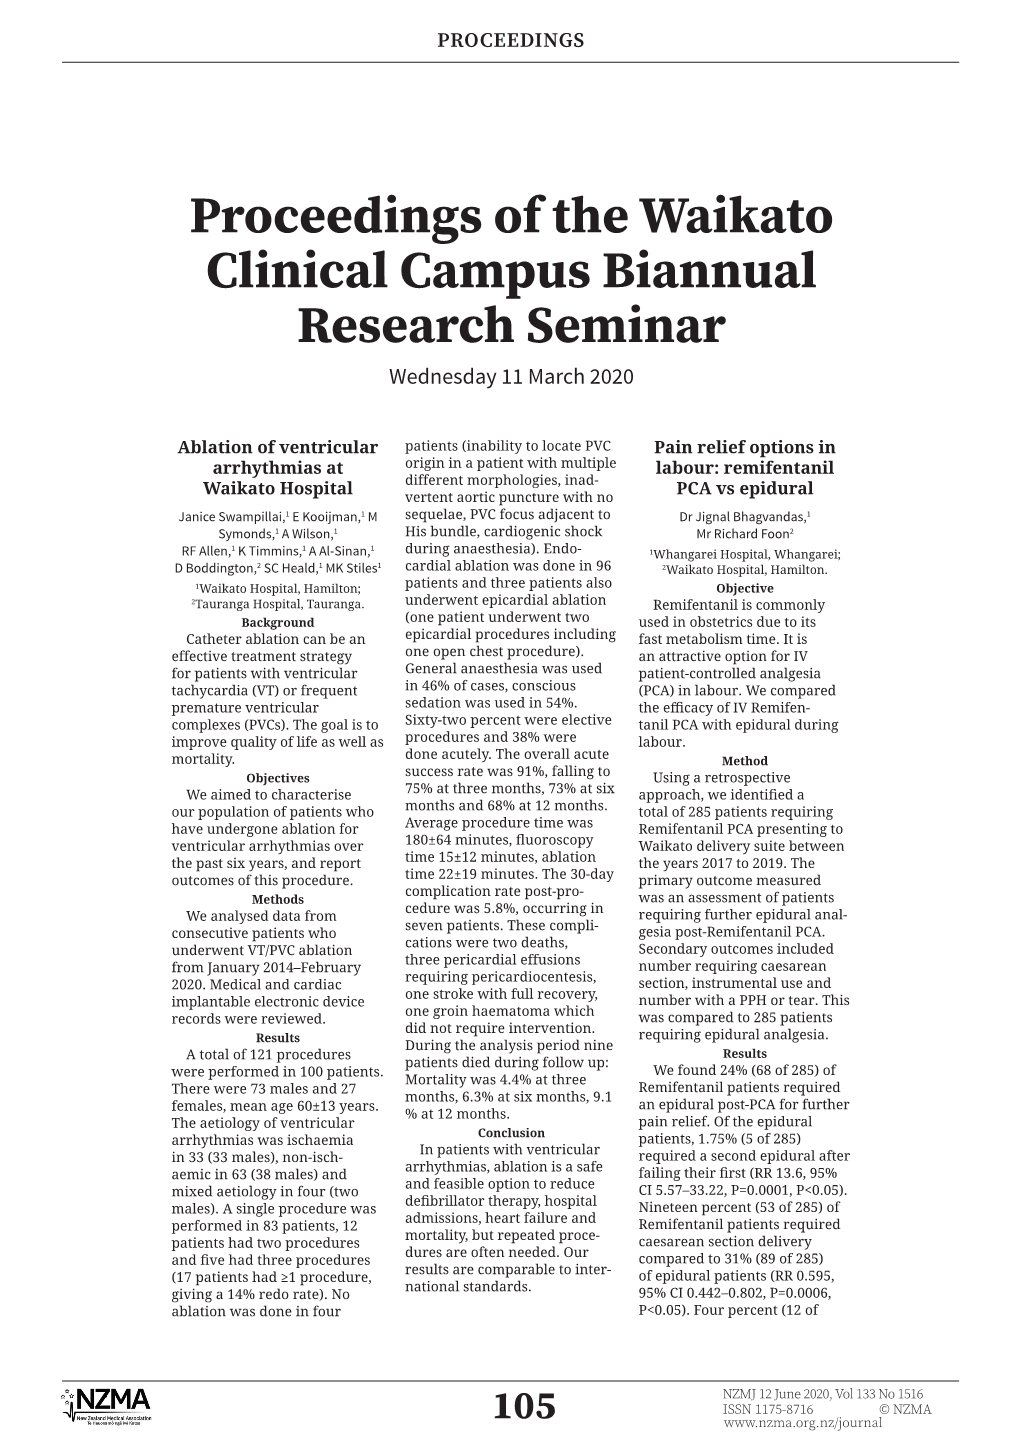 Proceedings of the Waikato Clinical Campus Biannual Research Seminar Wednesday 11 March 2020